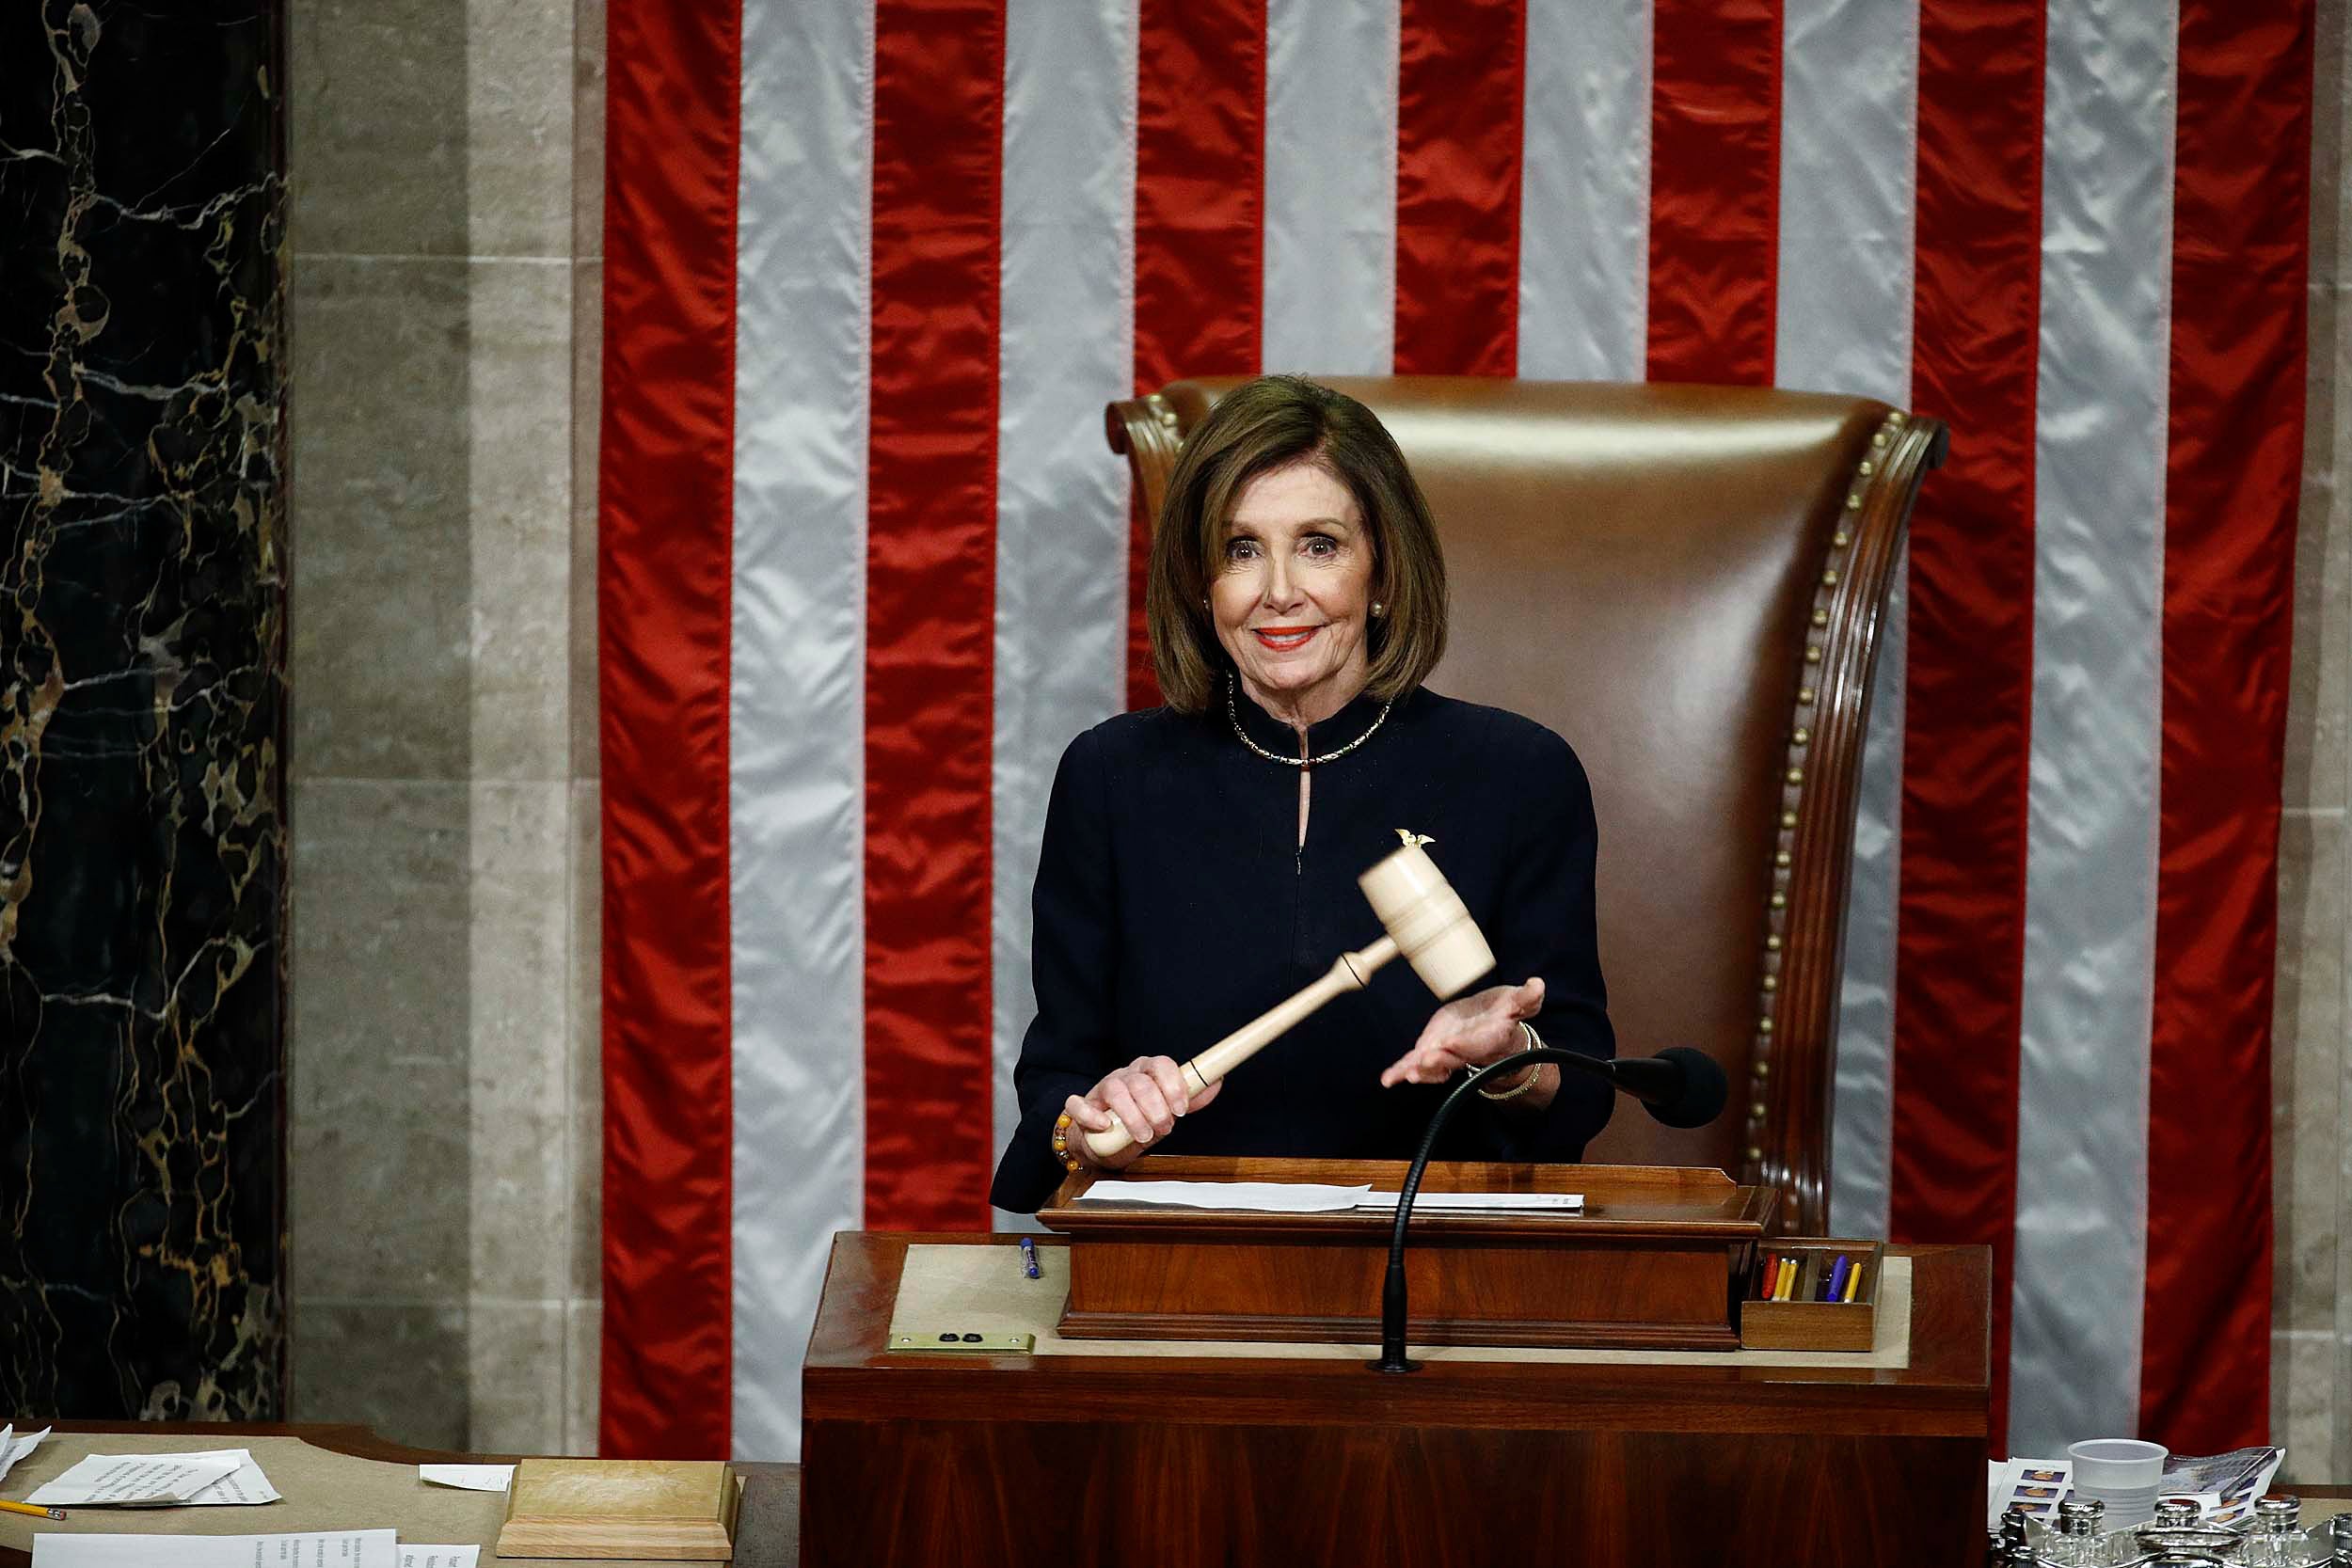 Nancy Pelosi stands holding the gavel during impeachment vote against President Trump.